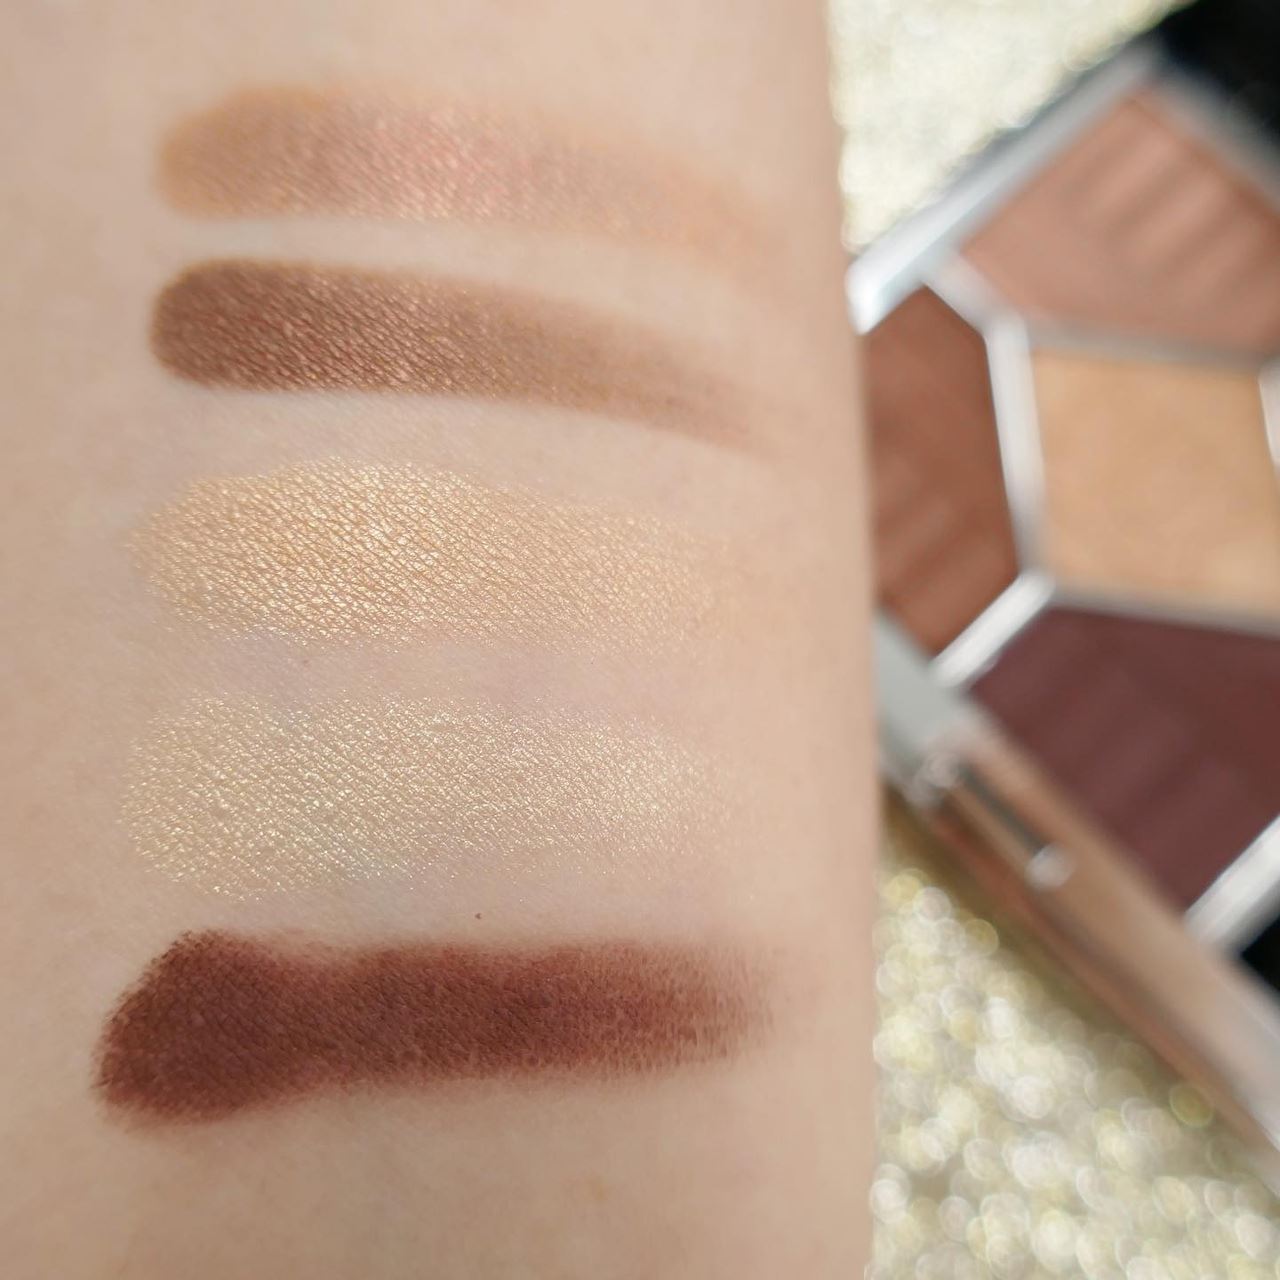 Dior 5 Couleurs Eyeshadow Summer 2022 - Swatches